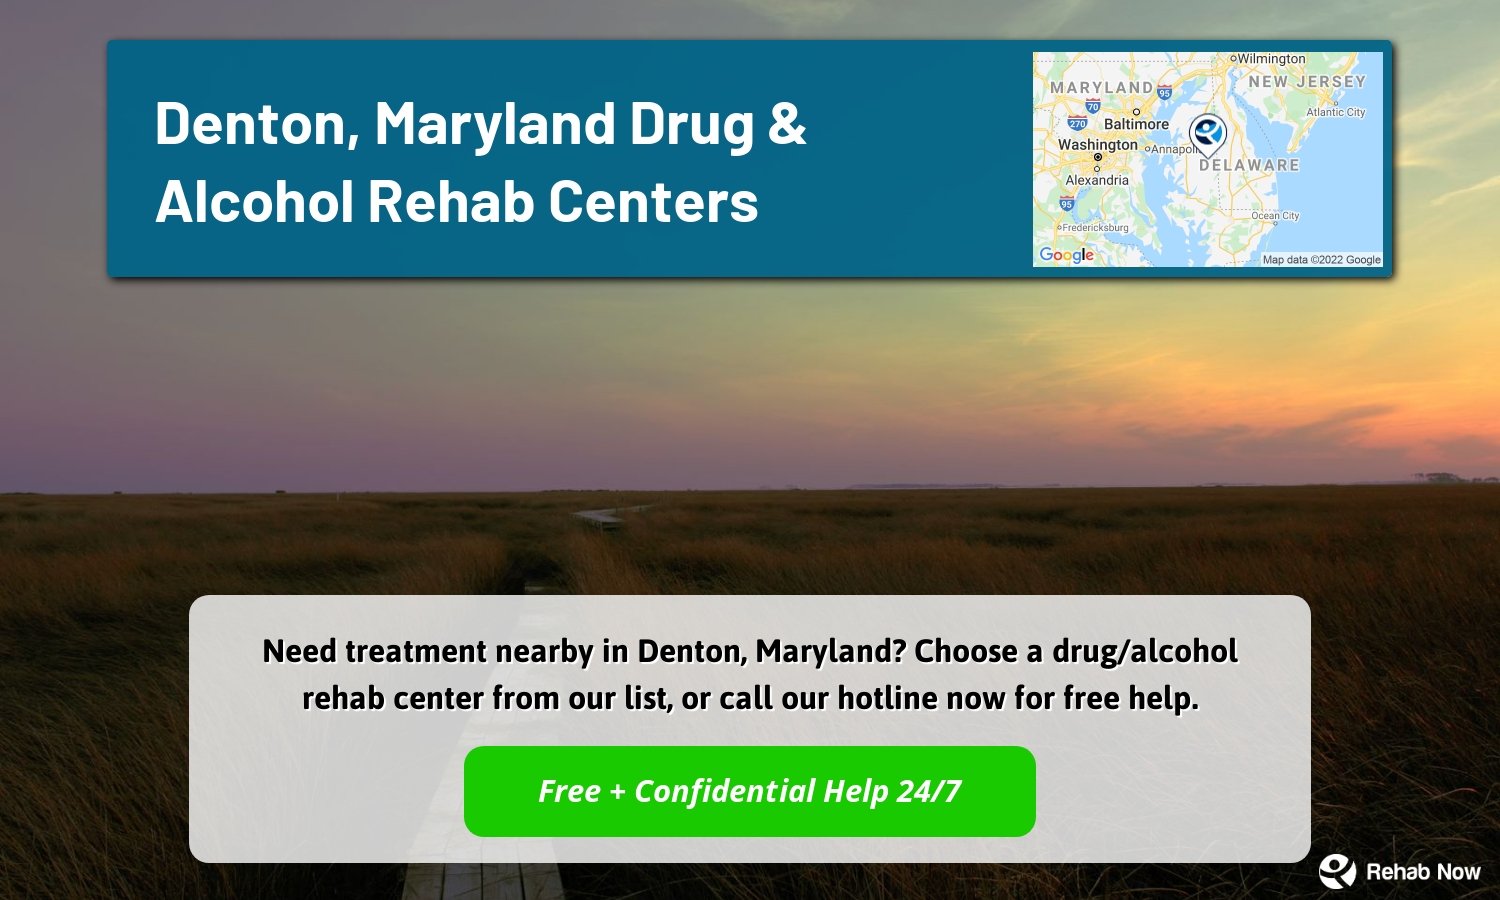 Need treatment nearby in Denton, Maryland? Choose a drug/alcohol rehab center from our list, or call our hotline now for free help.